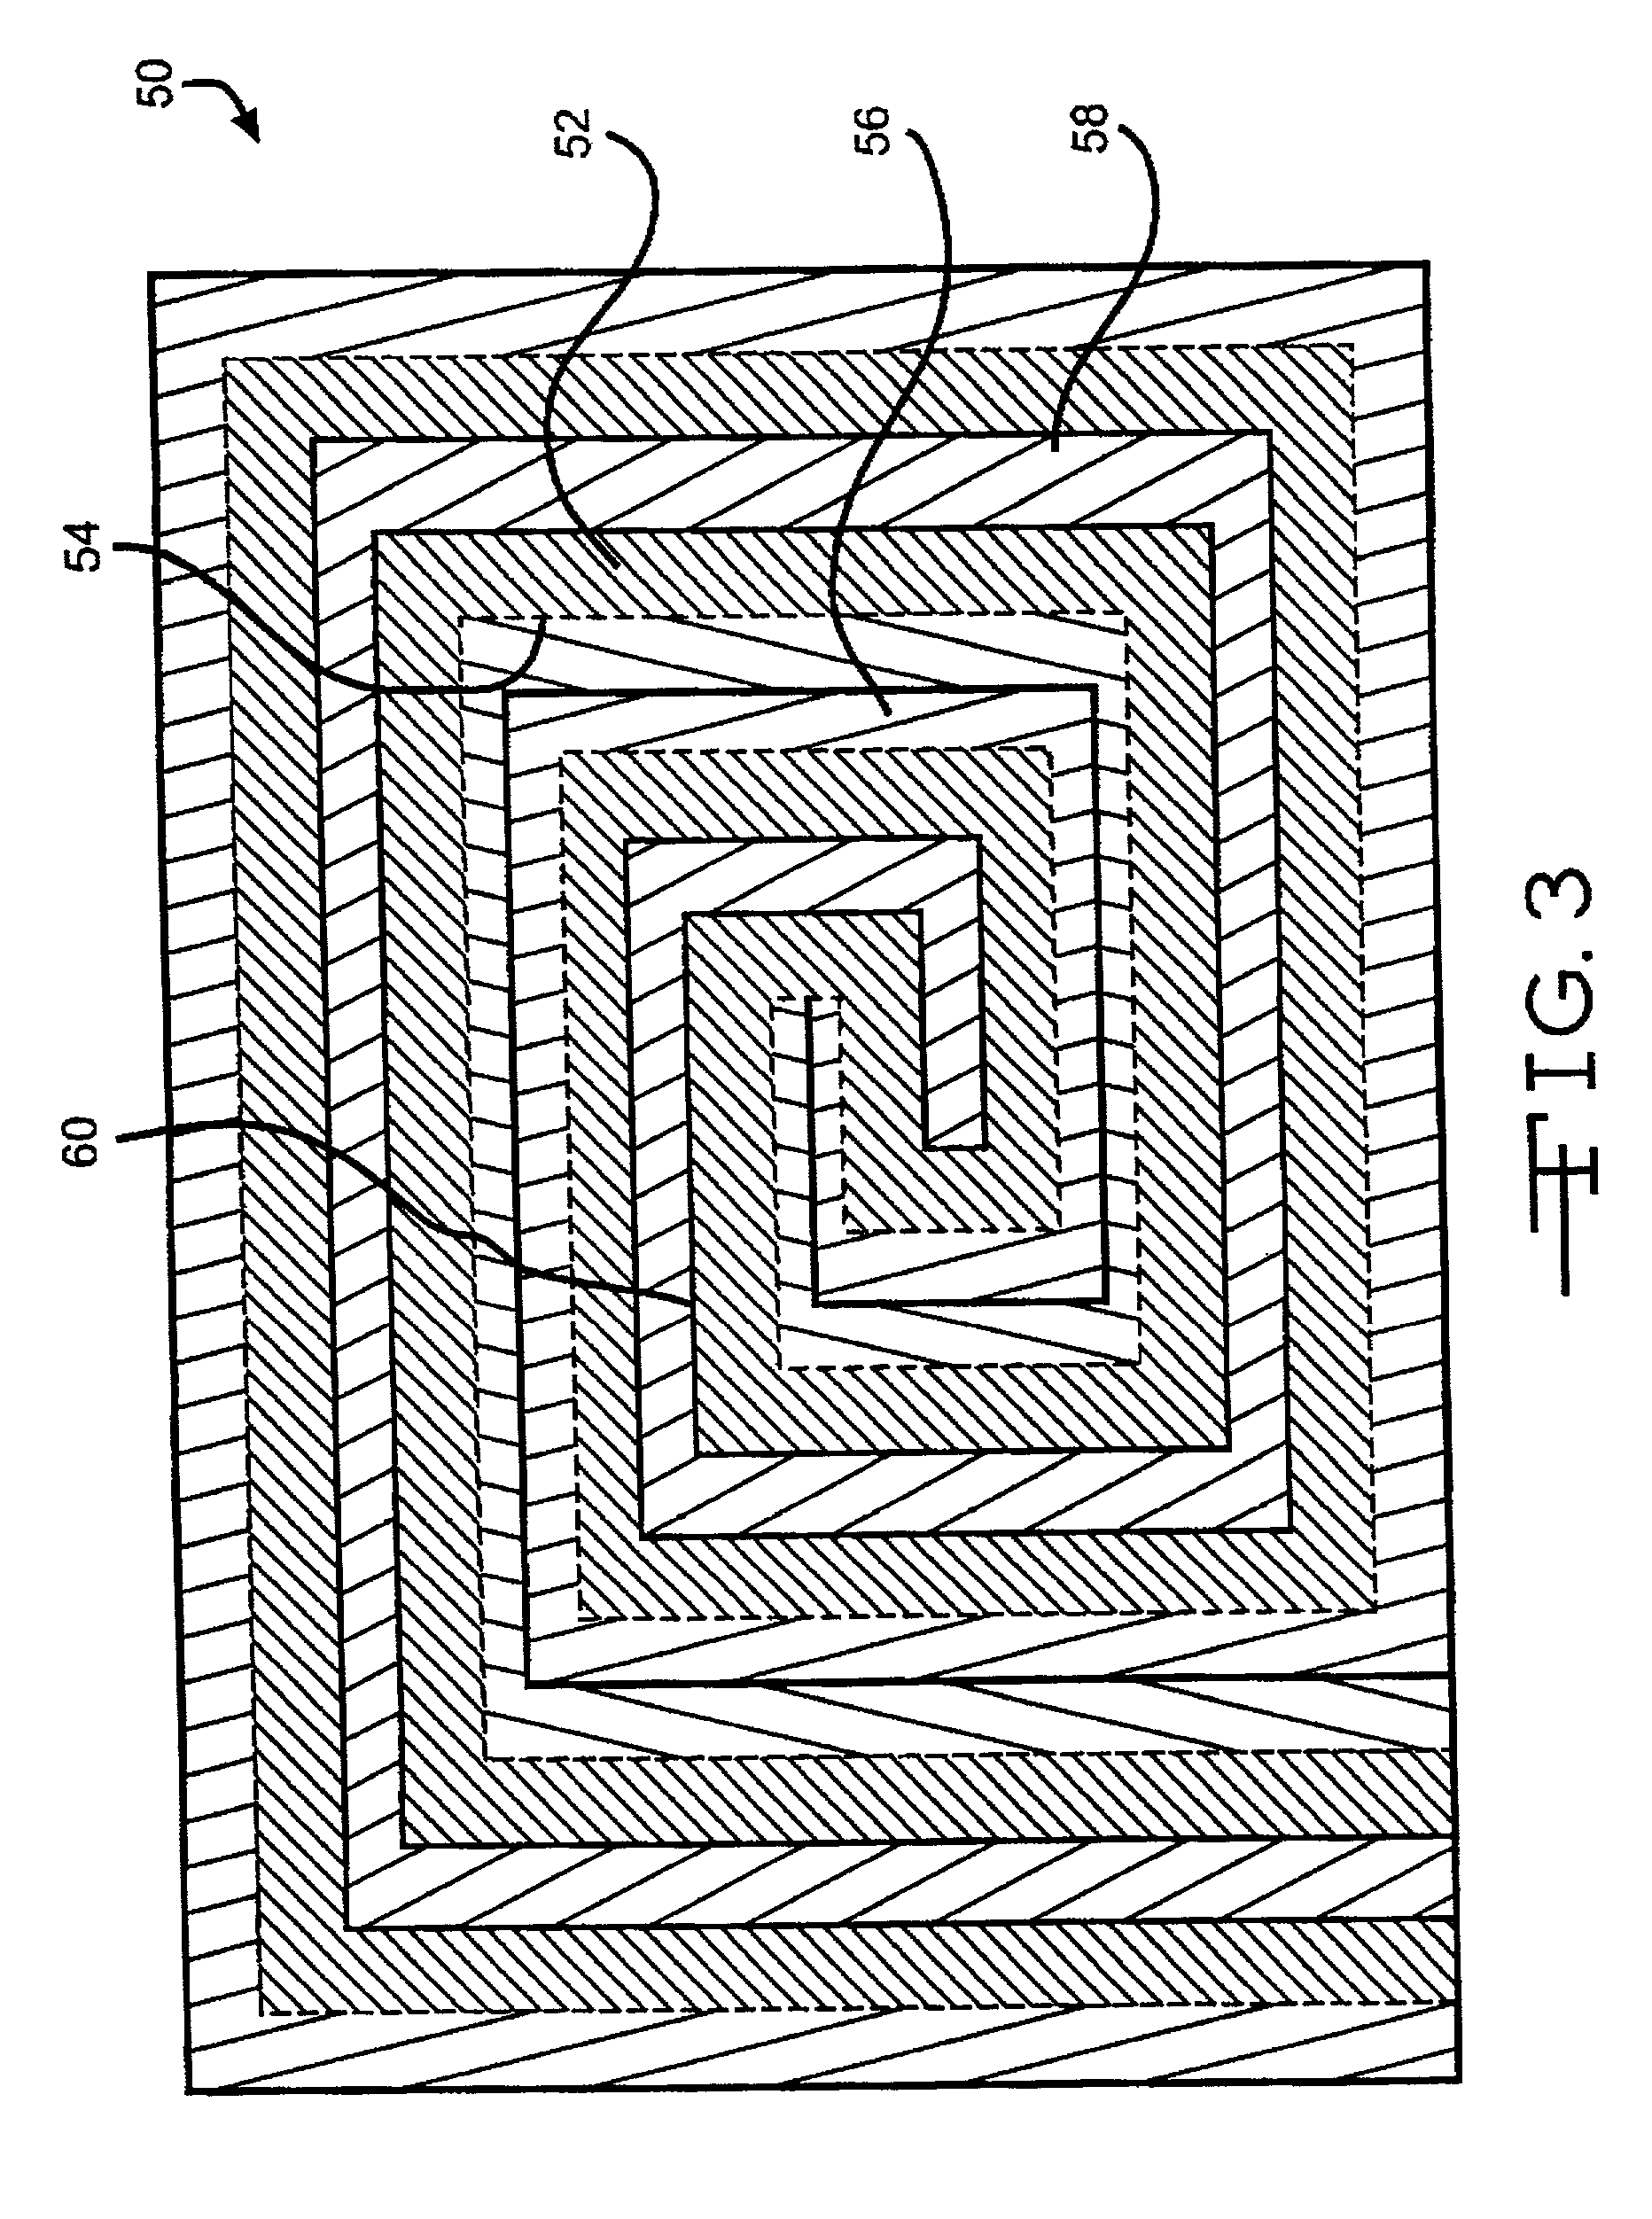 Process for fabricating continuously coated electrodes on a porous current collector and cell designs incorporating said electrodes